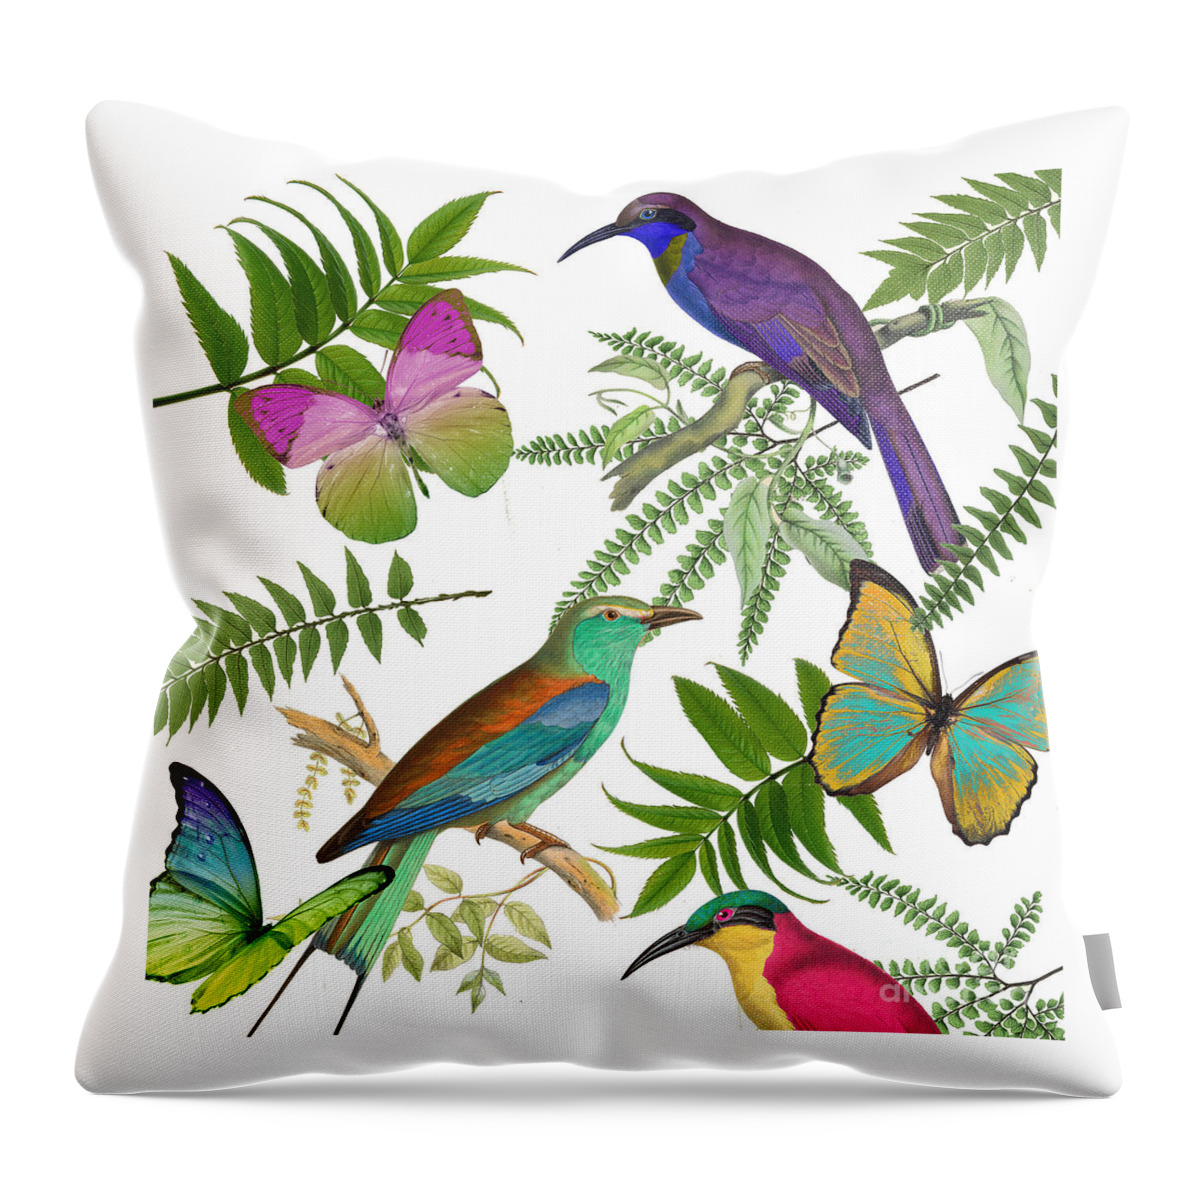 Beautiful Birds Throw Pillow featuring the painting Walking On Air I by Mindy Sommers